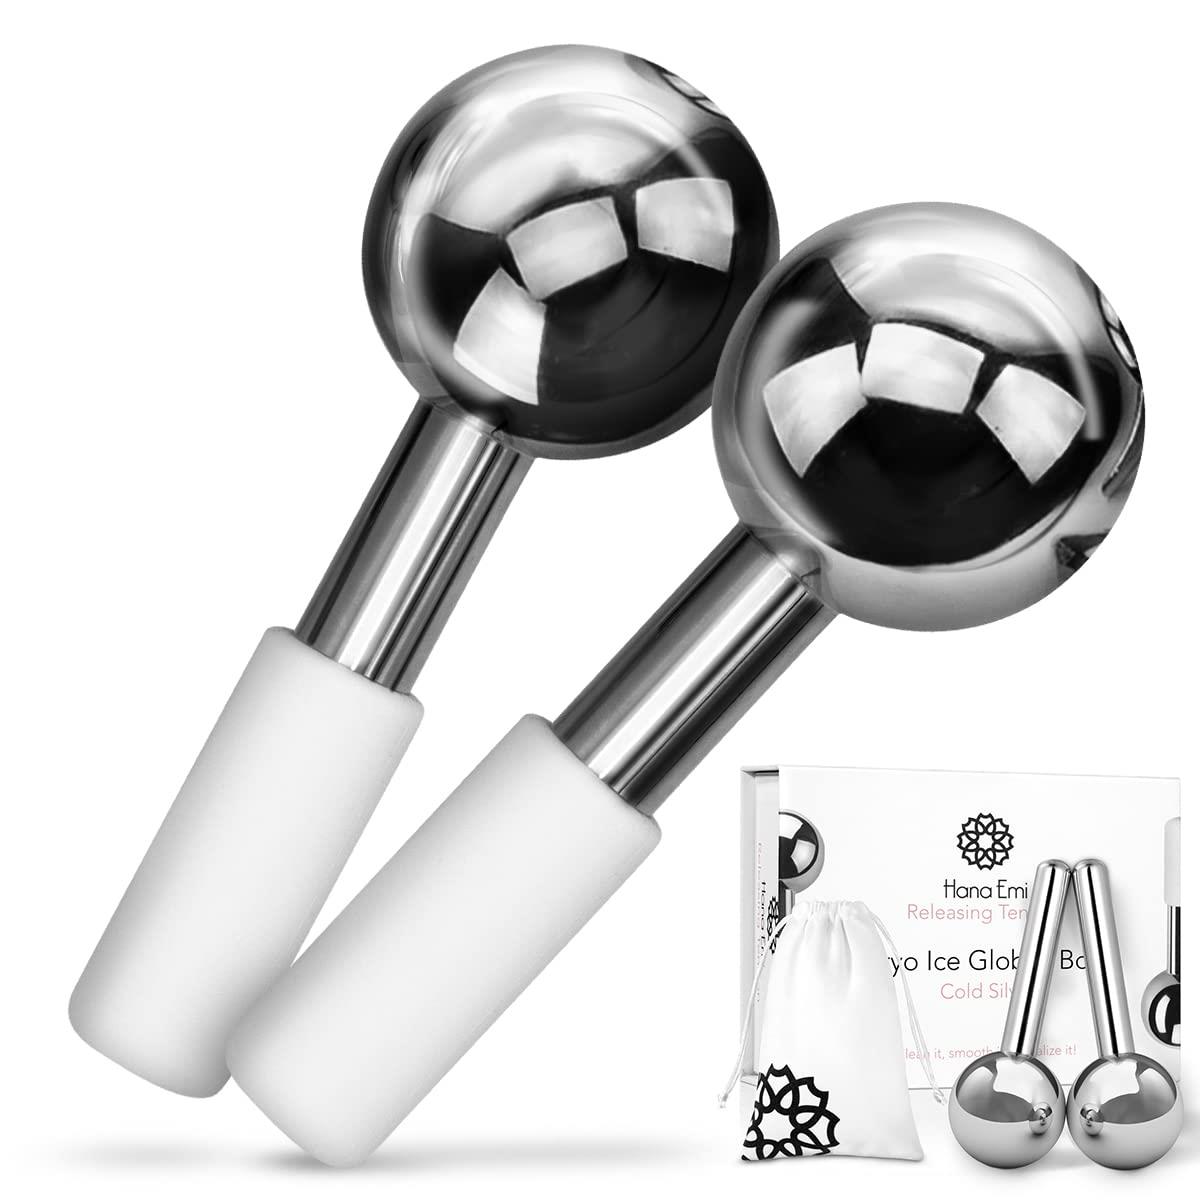 Get 60% Off Steel Ice Globes Massager For Facials at Hana Emi Coupons and Promo Codes December 2023 Check the link below to get the coupons deliciouscoupons.com/store/hana-emi/